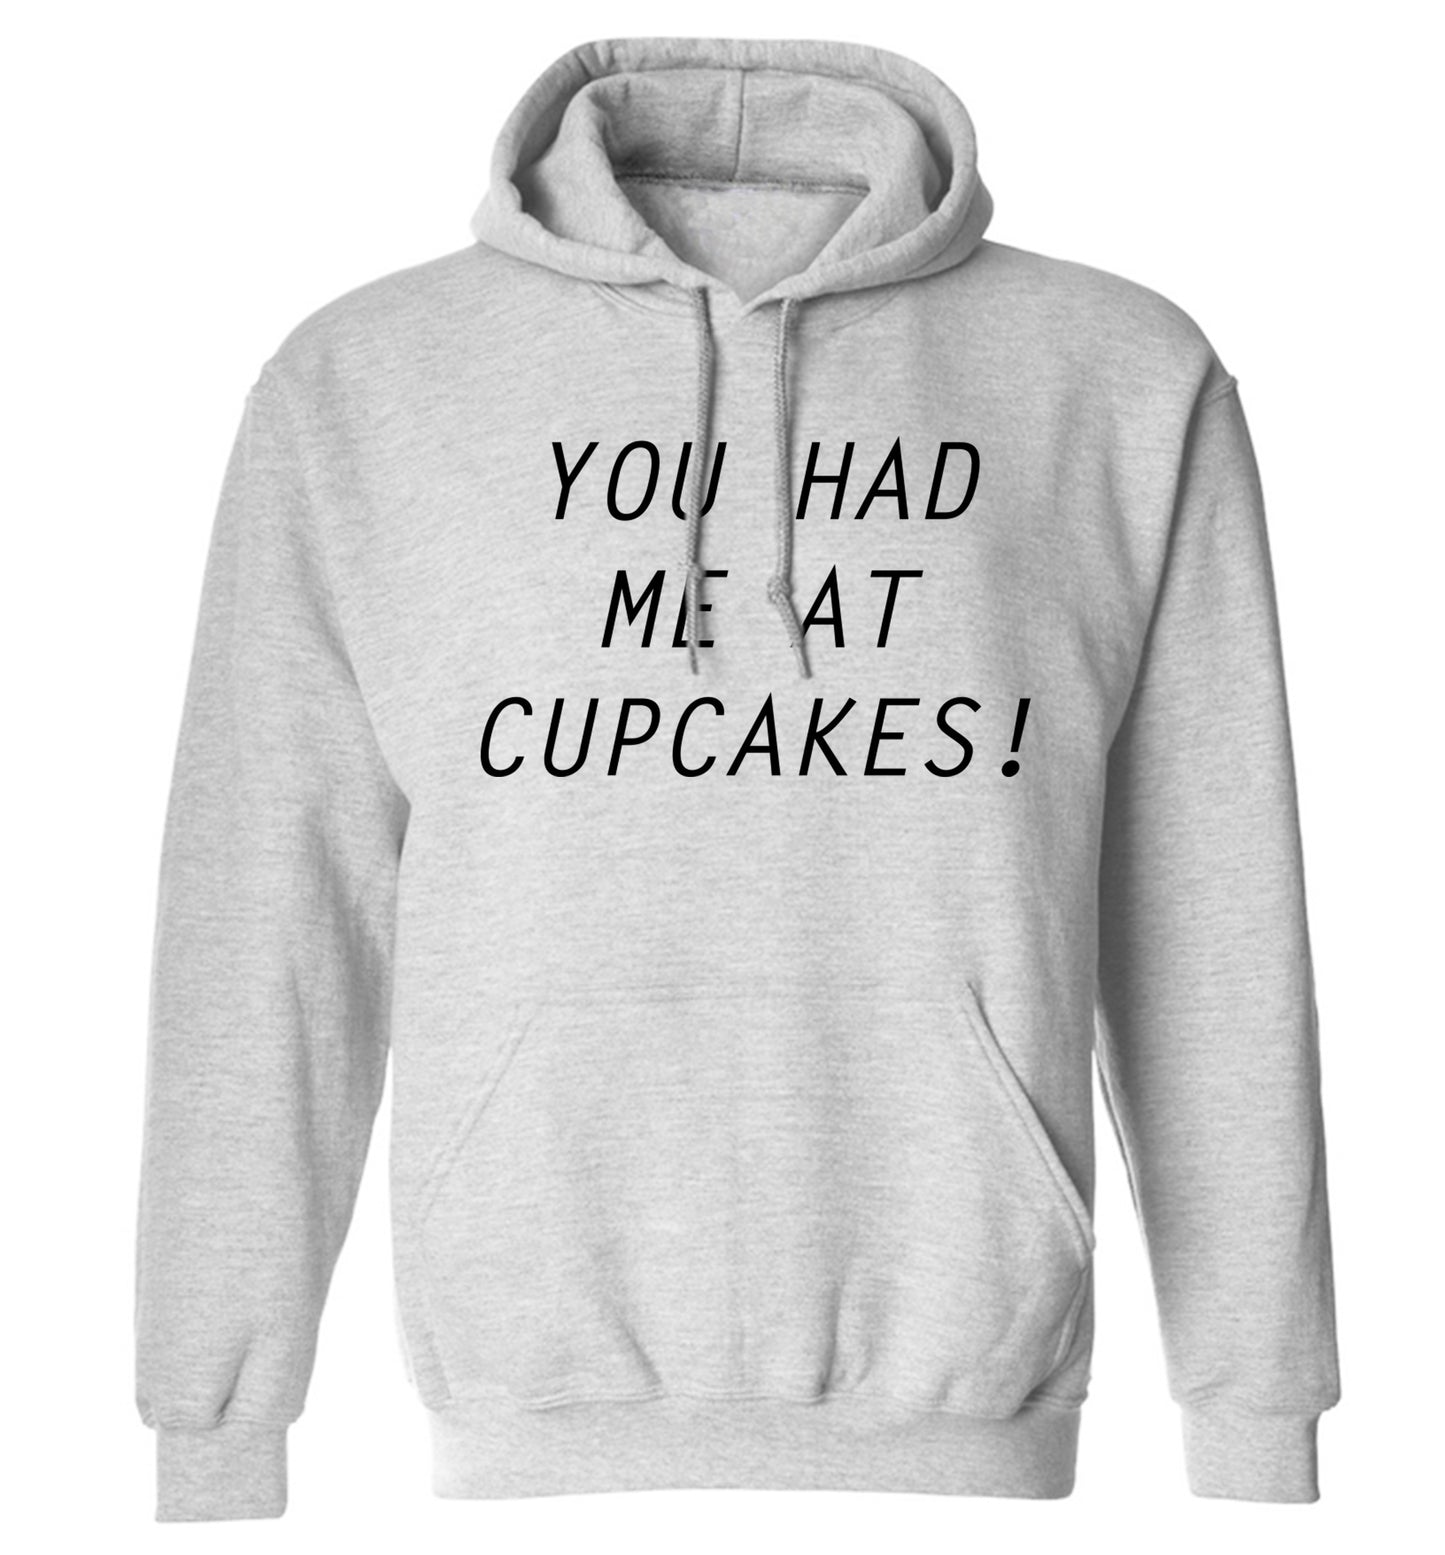 You had me at cupcakes adults unisex grey hoodie 2XL